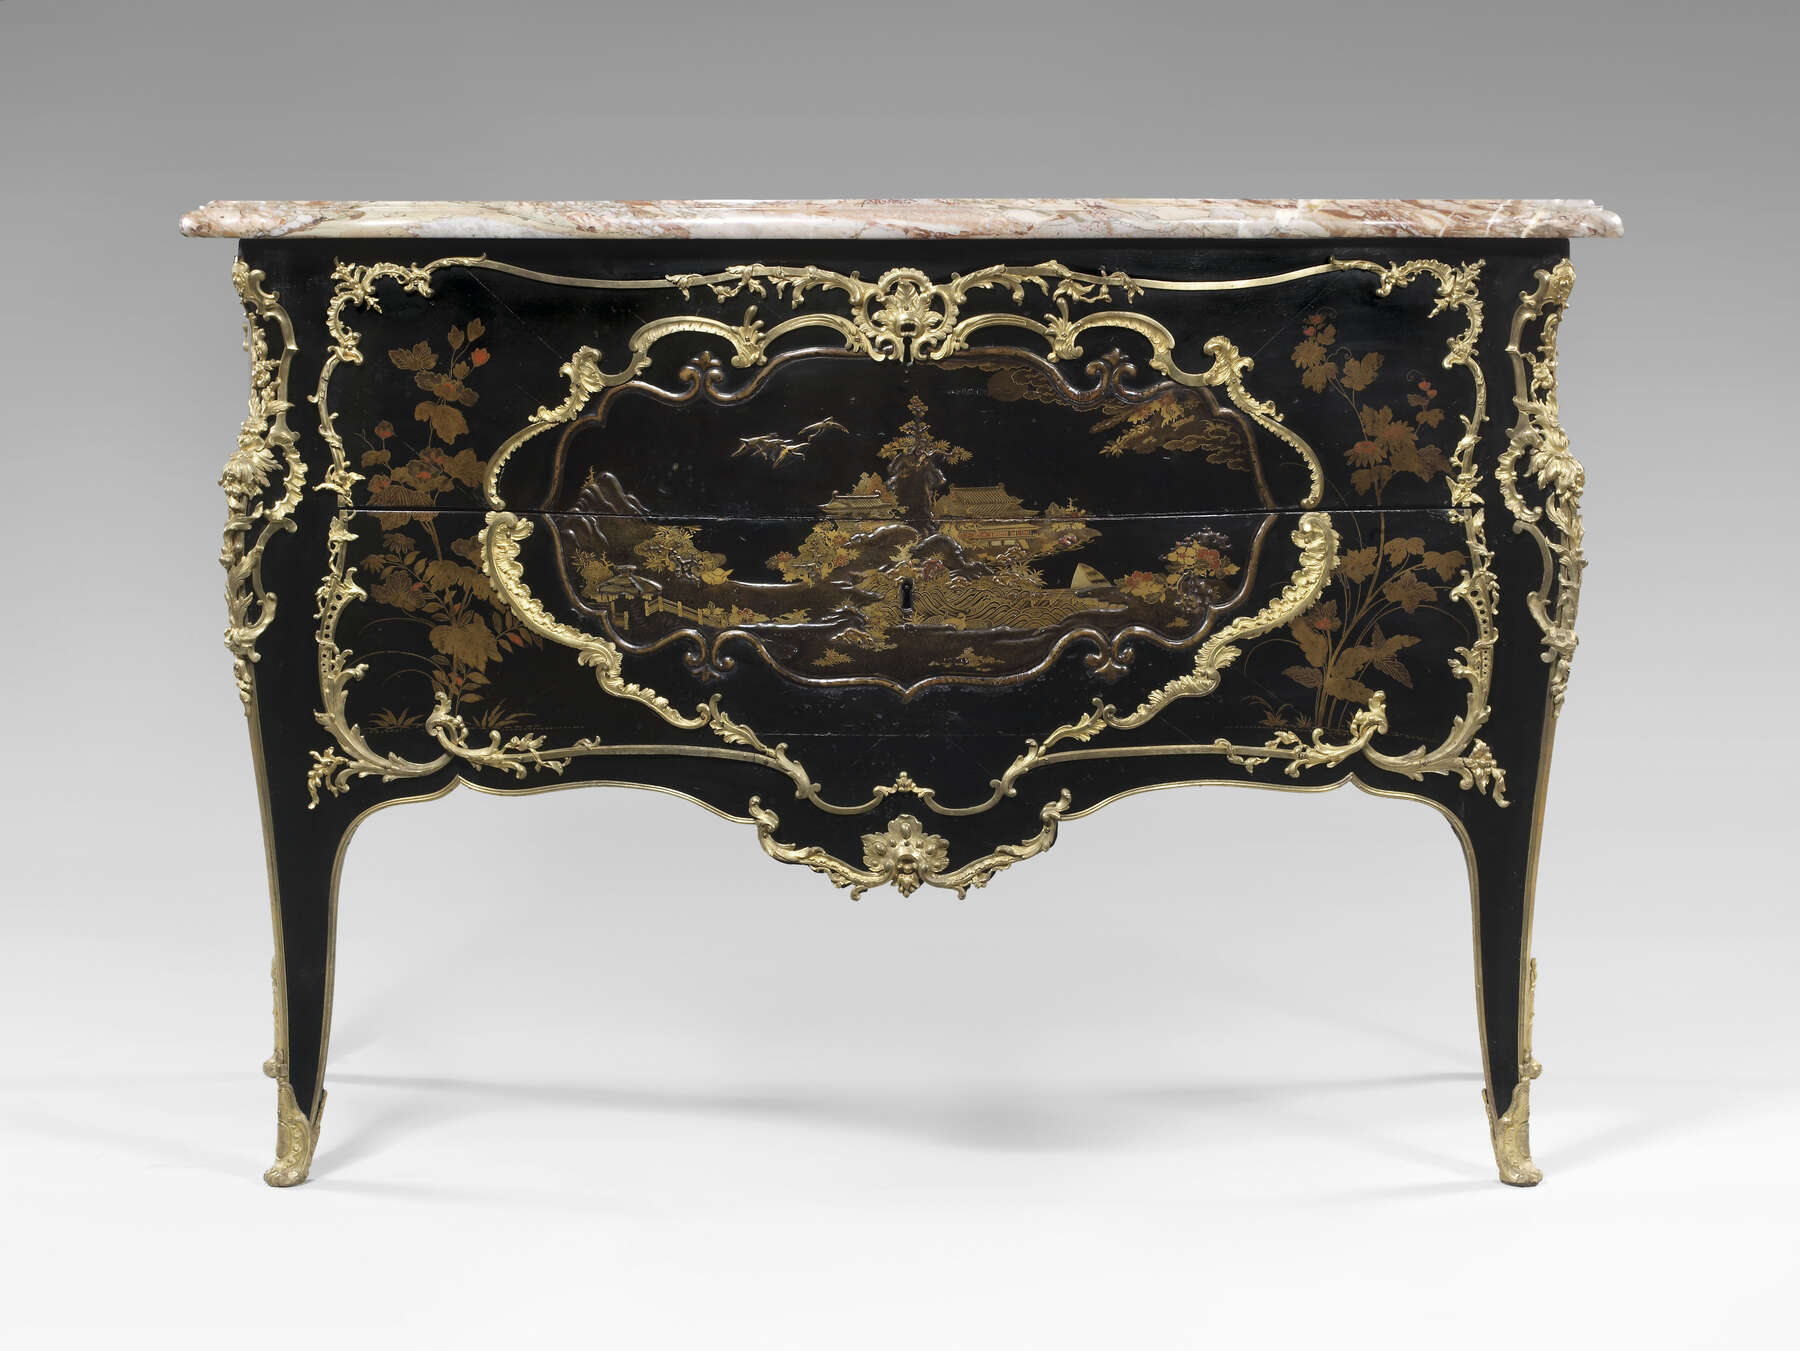 Commode à vantaux | French Rococo Ébénisterie in the J. Paul Getty Museum